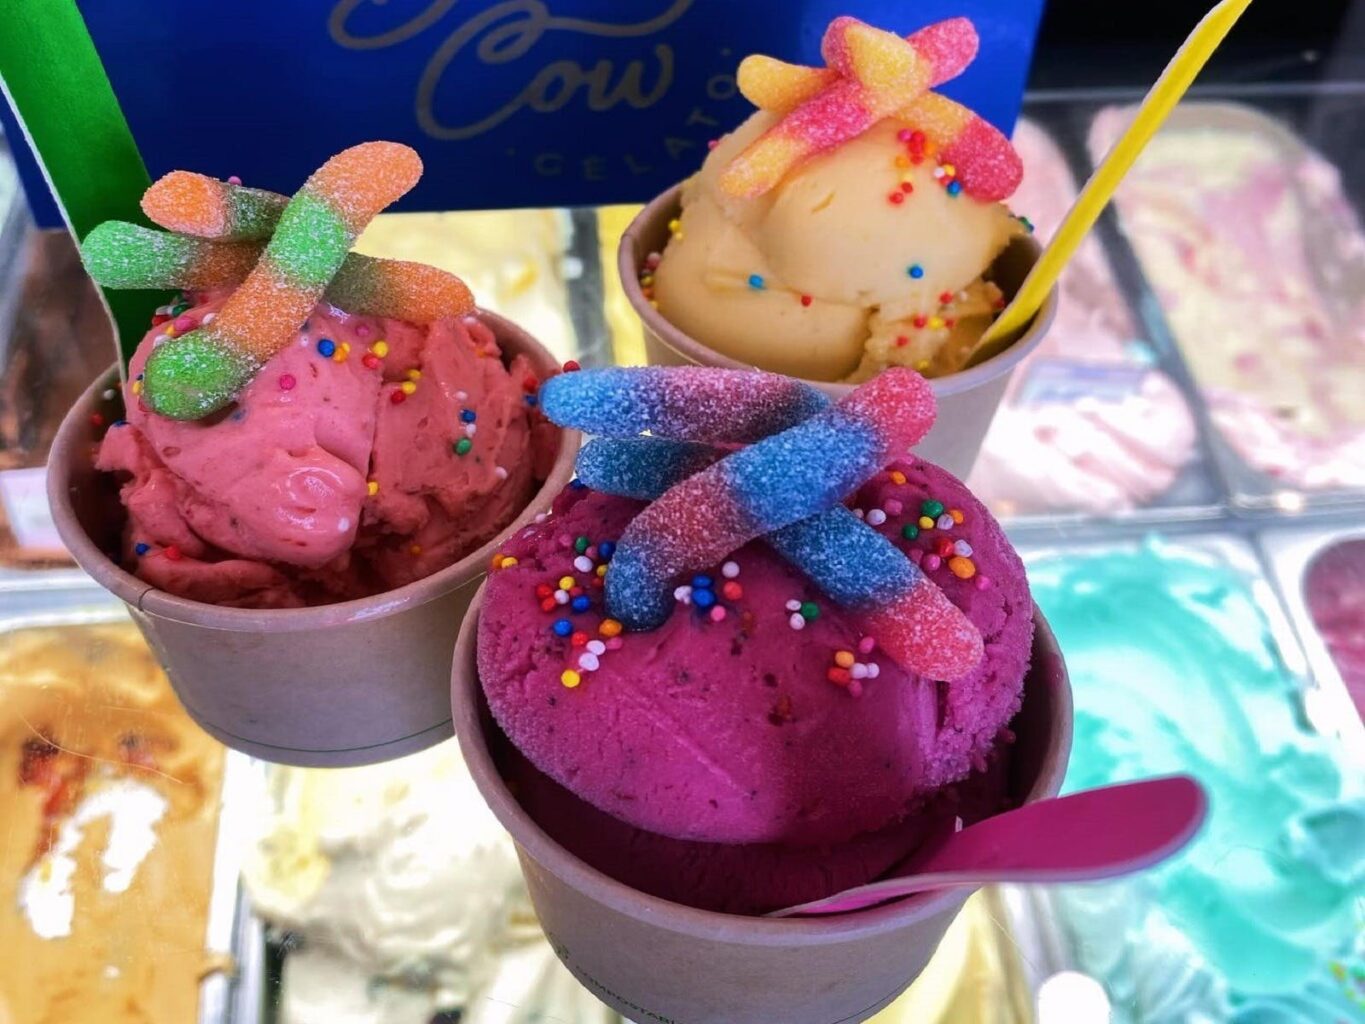 Blue Cow Gelato in Cups with Lolly Toppings